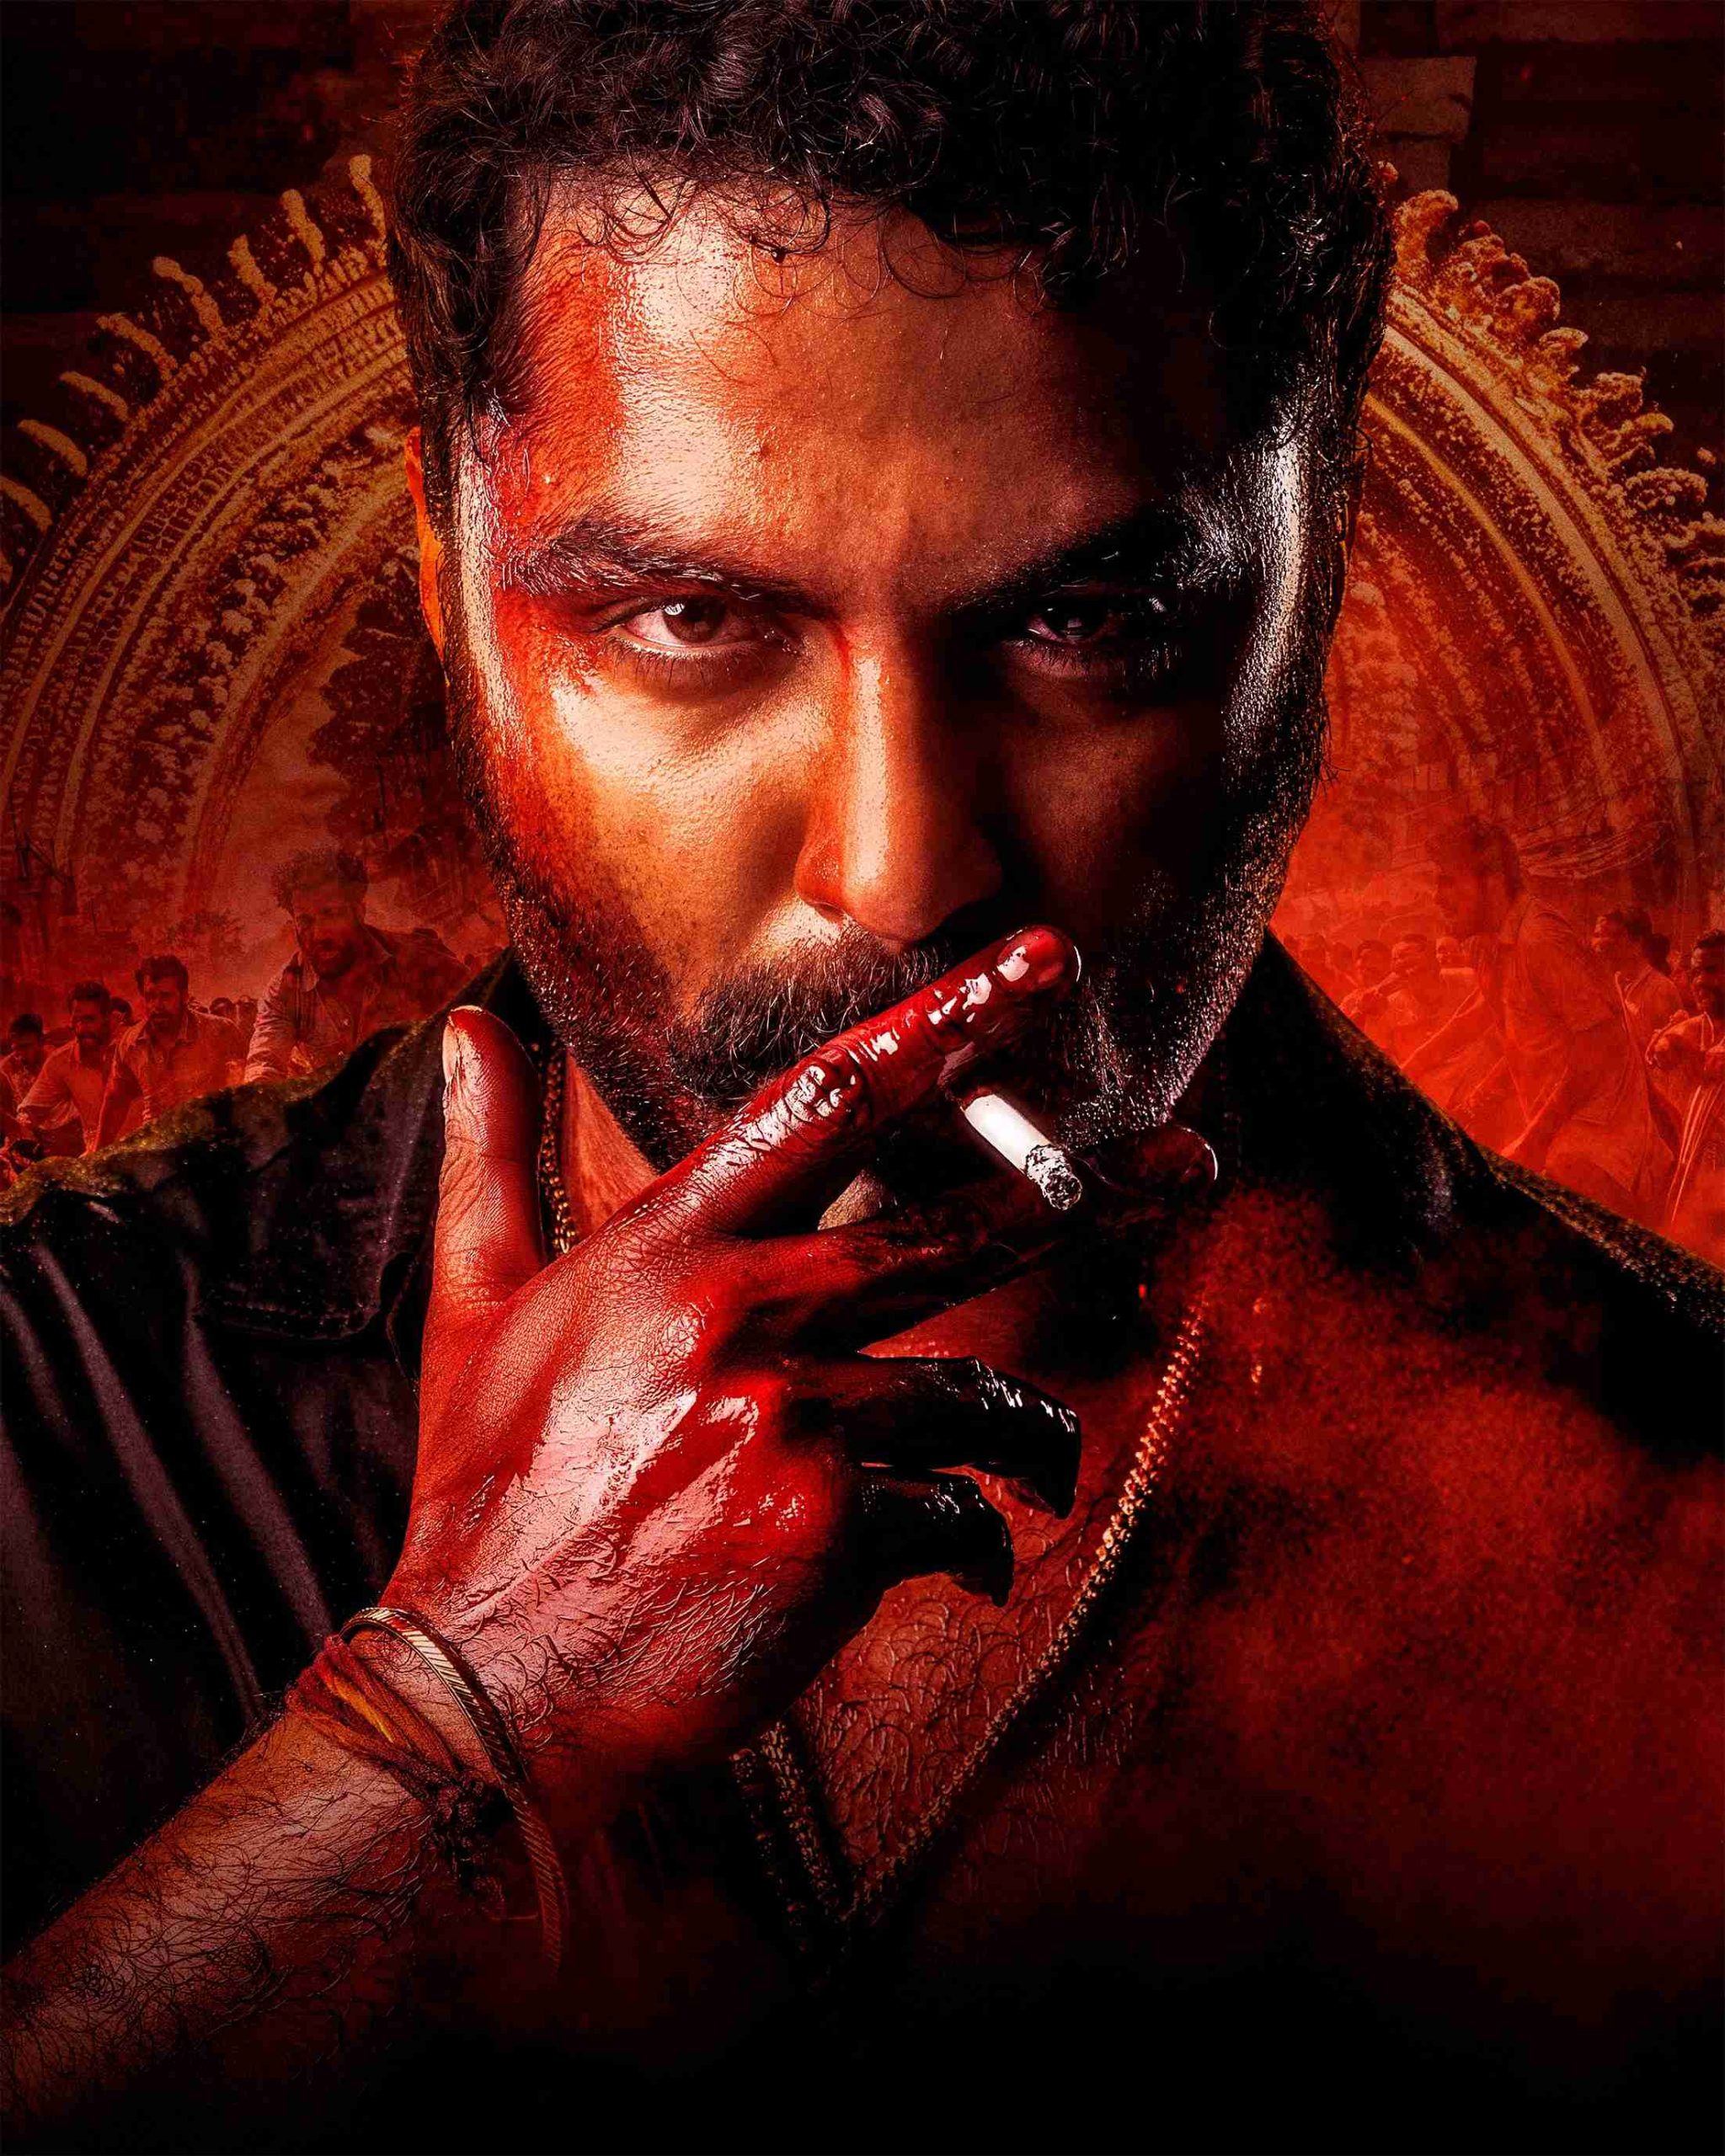 Gangs of Godavari teaser is highly intense and intriguing